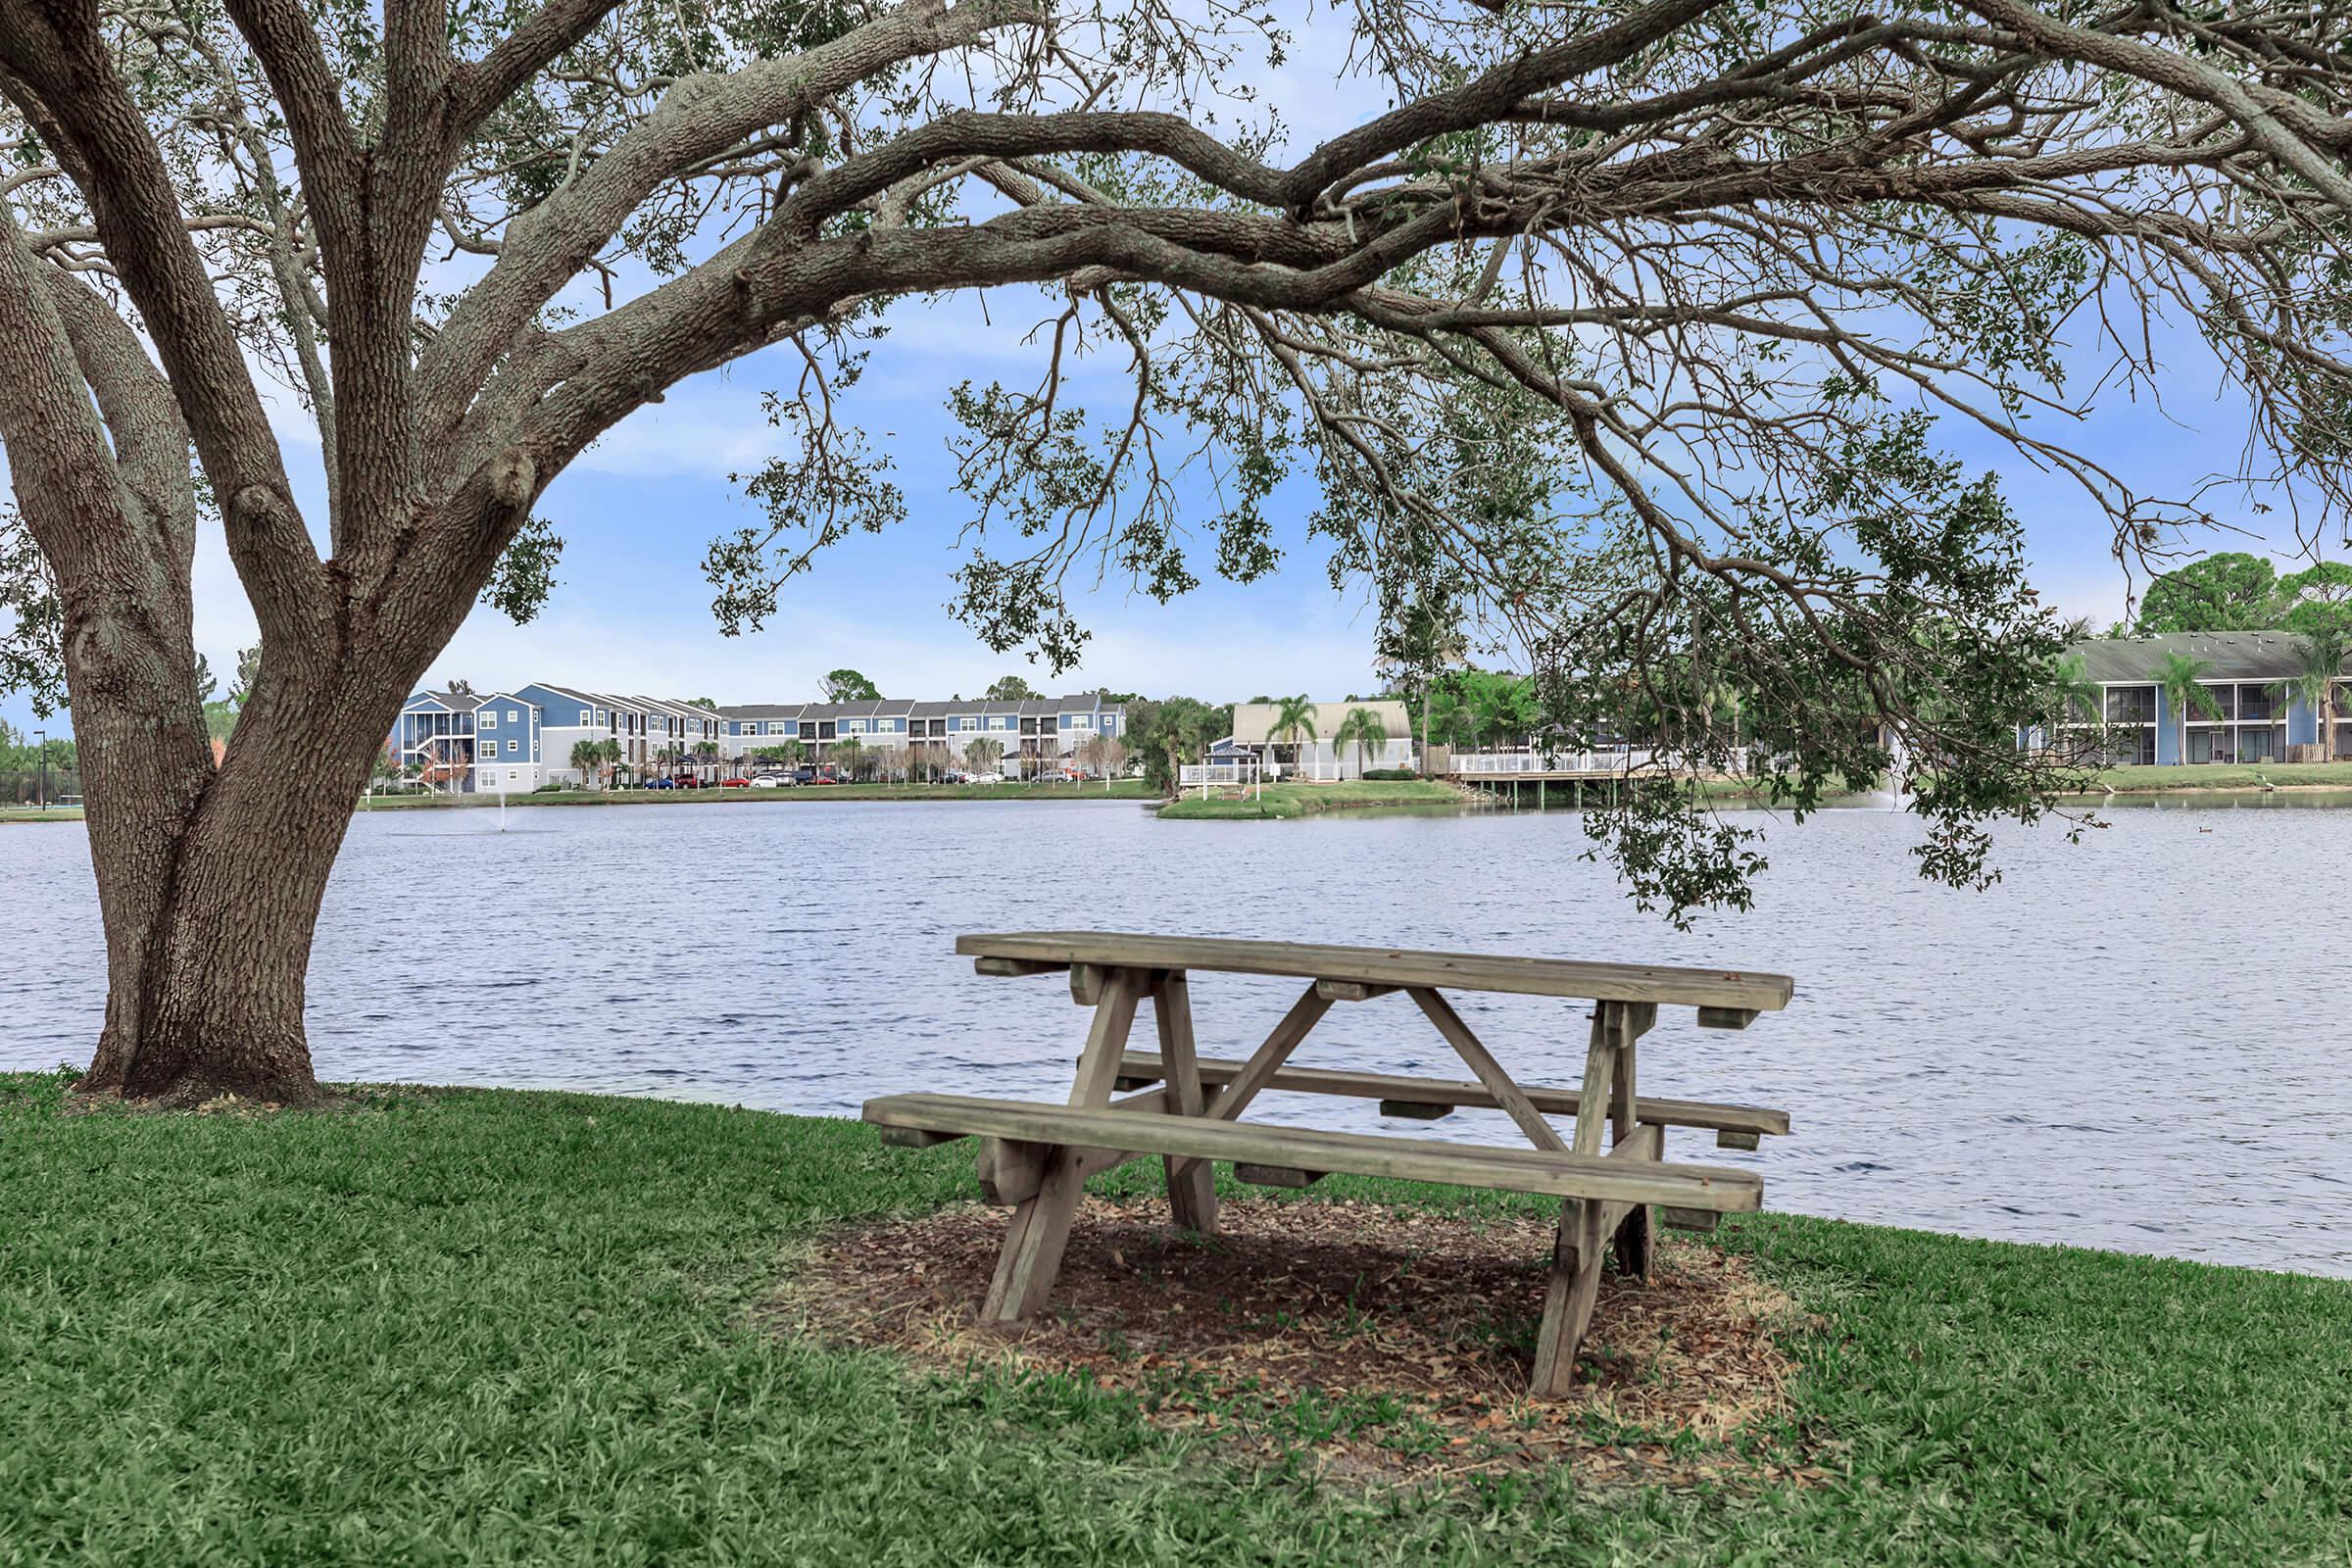 a wooden park bench sitting in front of a body of water